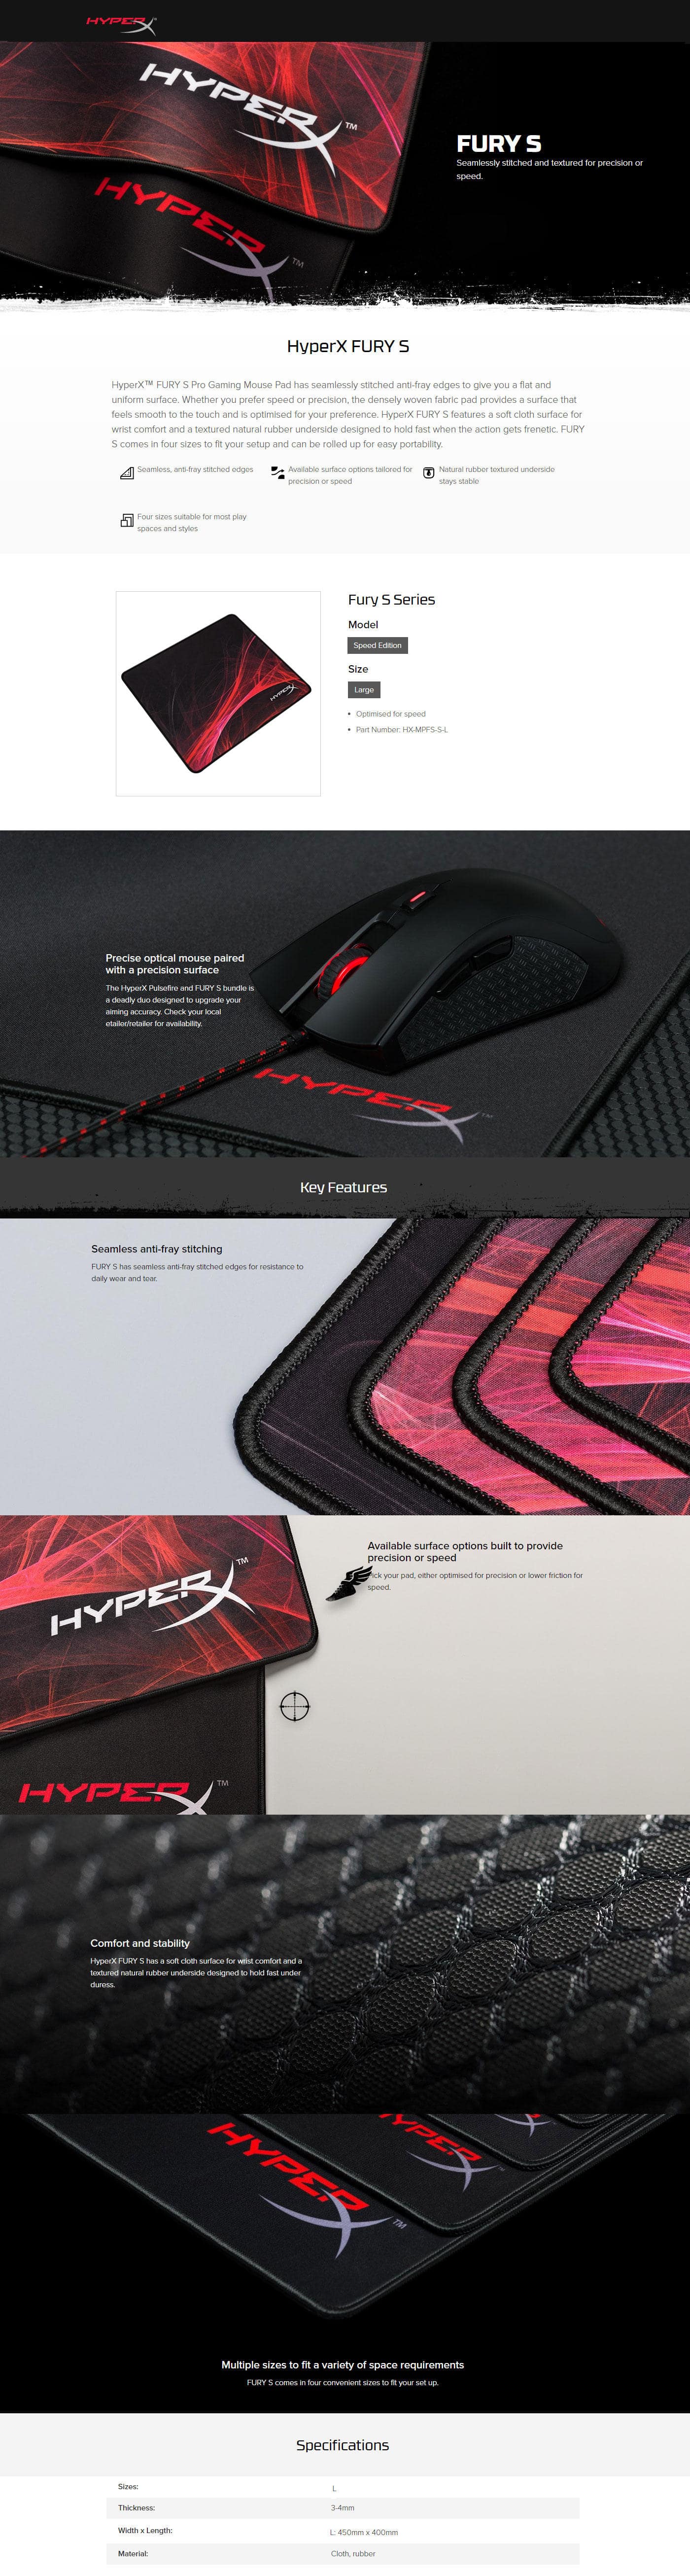  Buy Online HyperX FURY S Speed Edition Gaming Mouse Pad - Large (HX-MPFS-S-L)